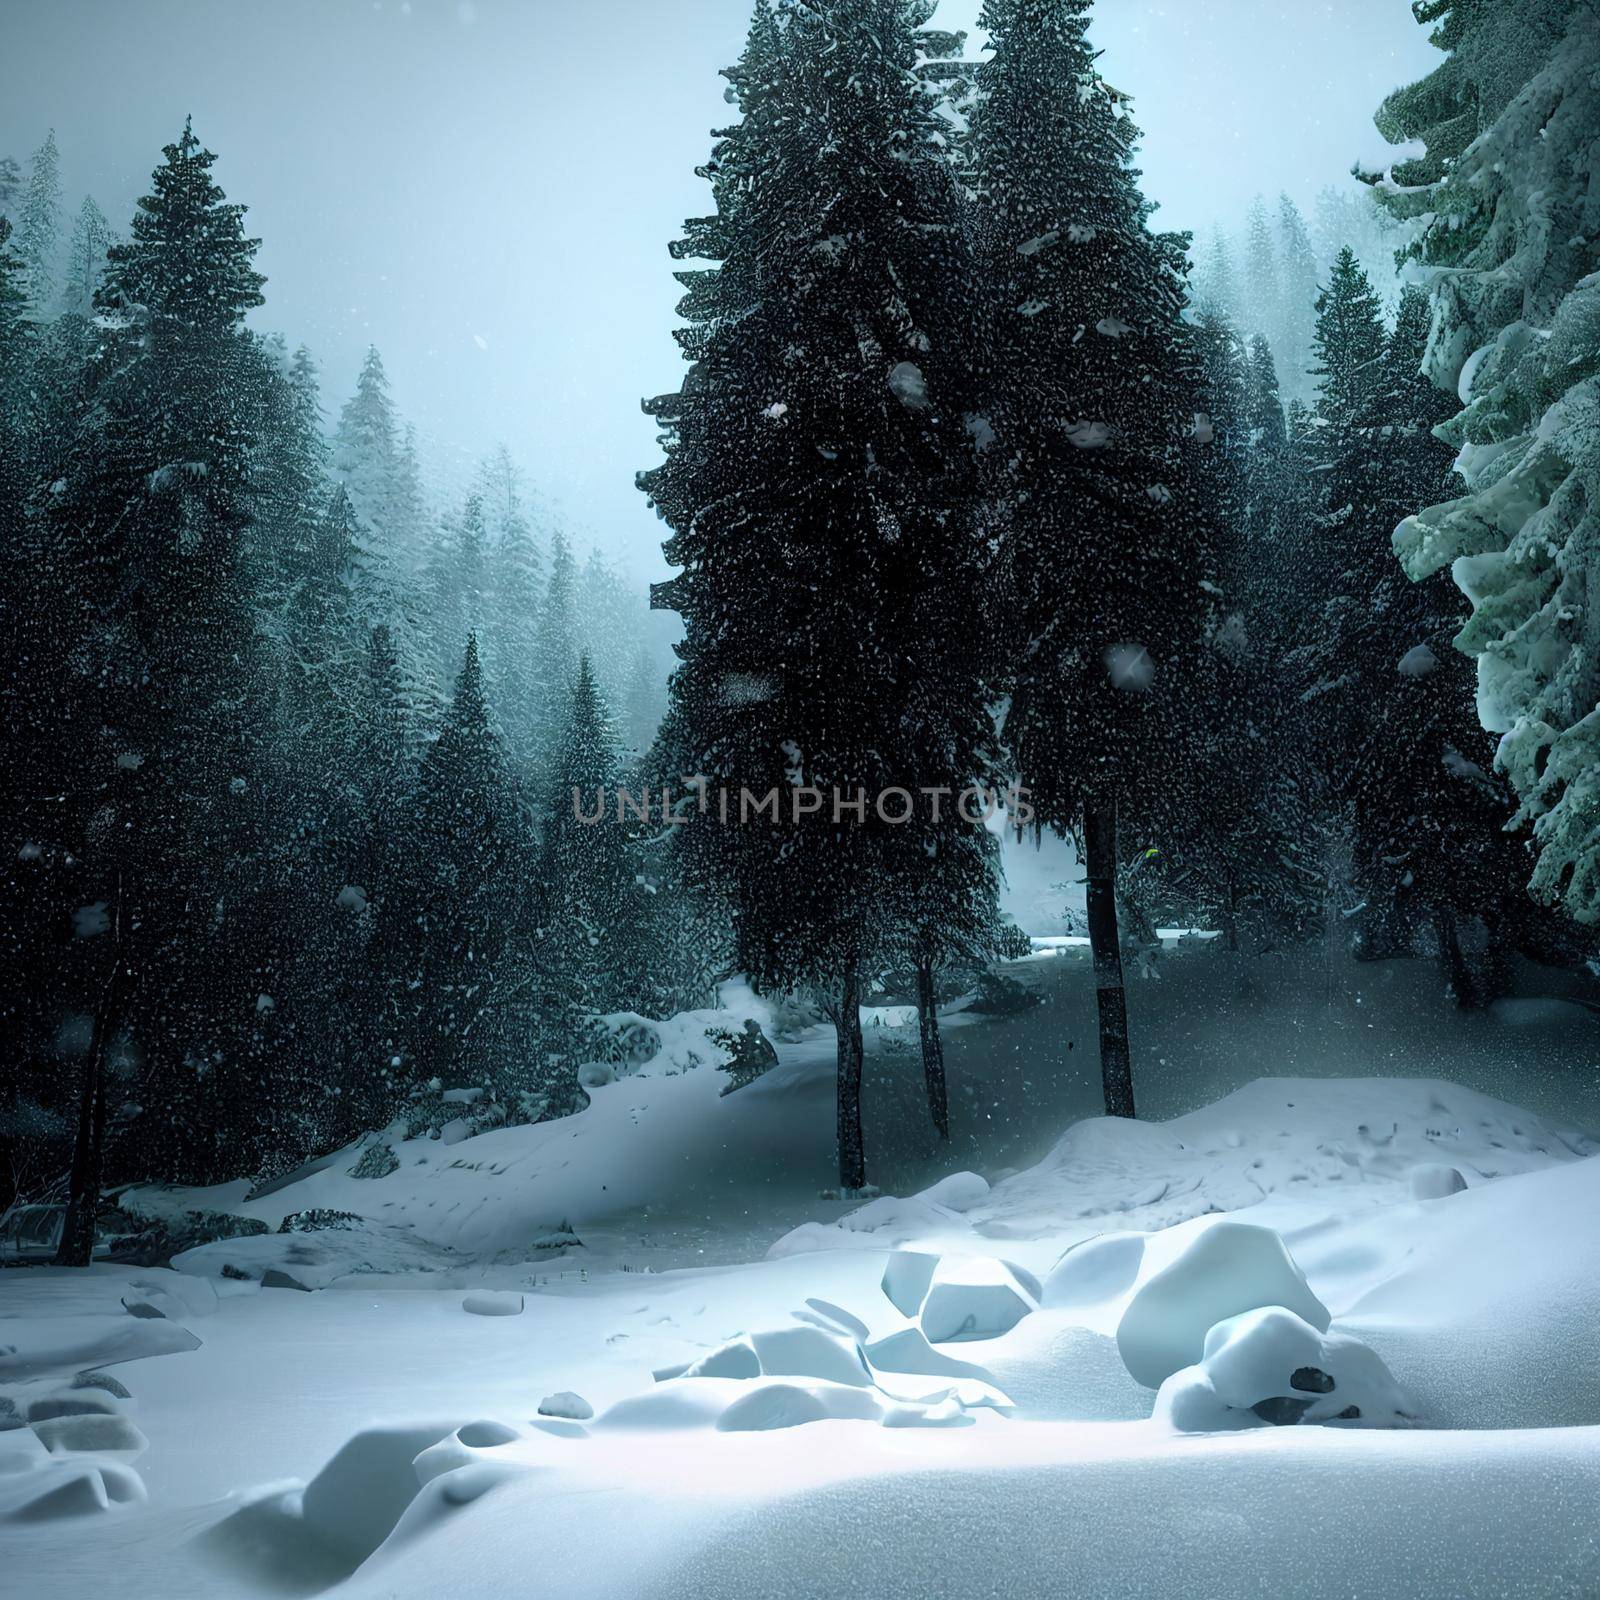 Gloomy image of a snowy forest by NeuroSky